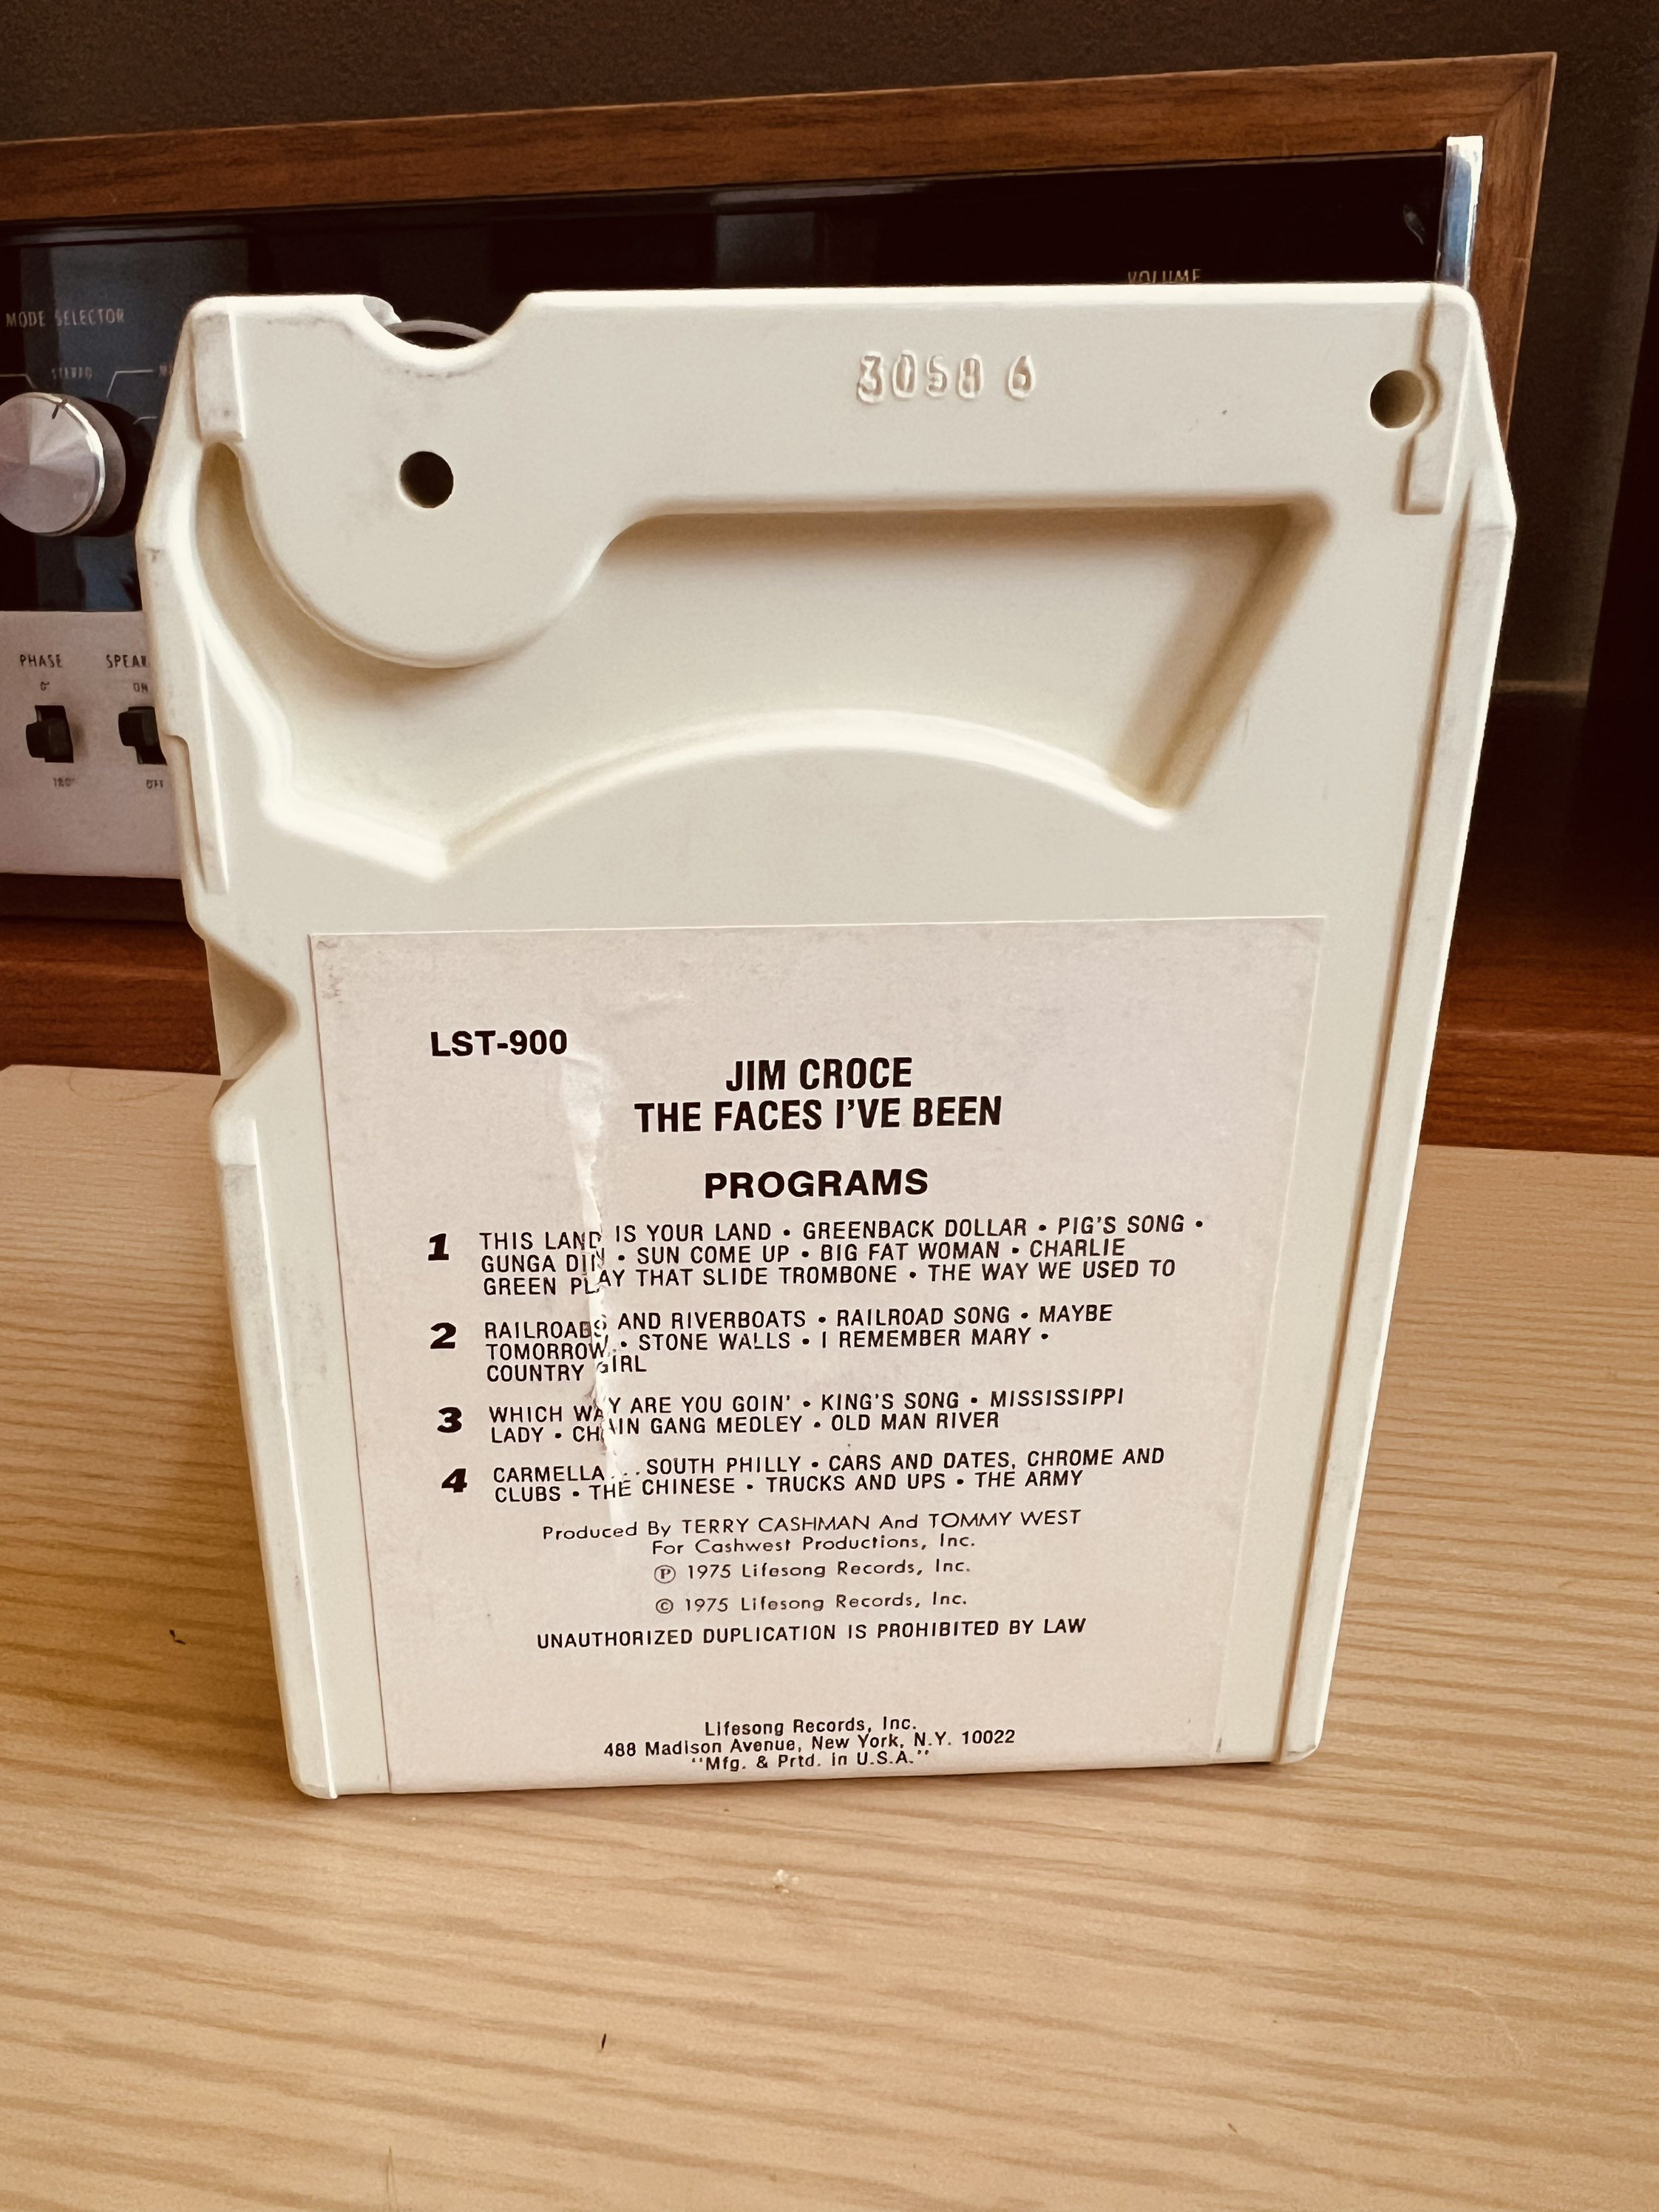 Vintage Jim the Faces Been 8 Track Album -